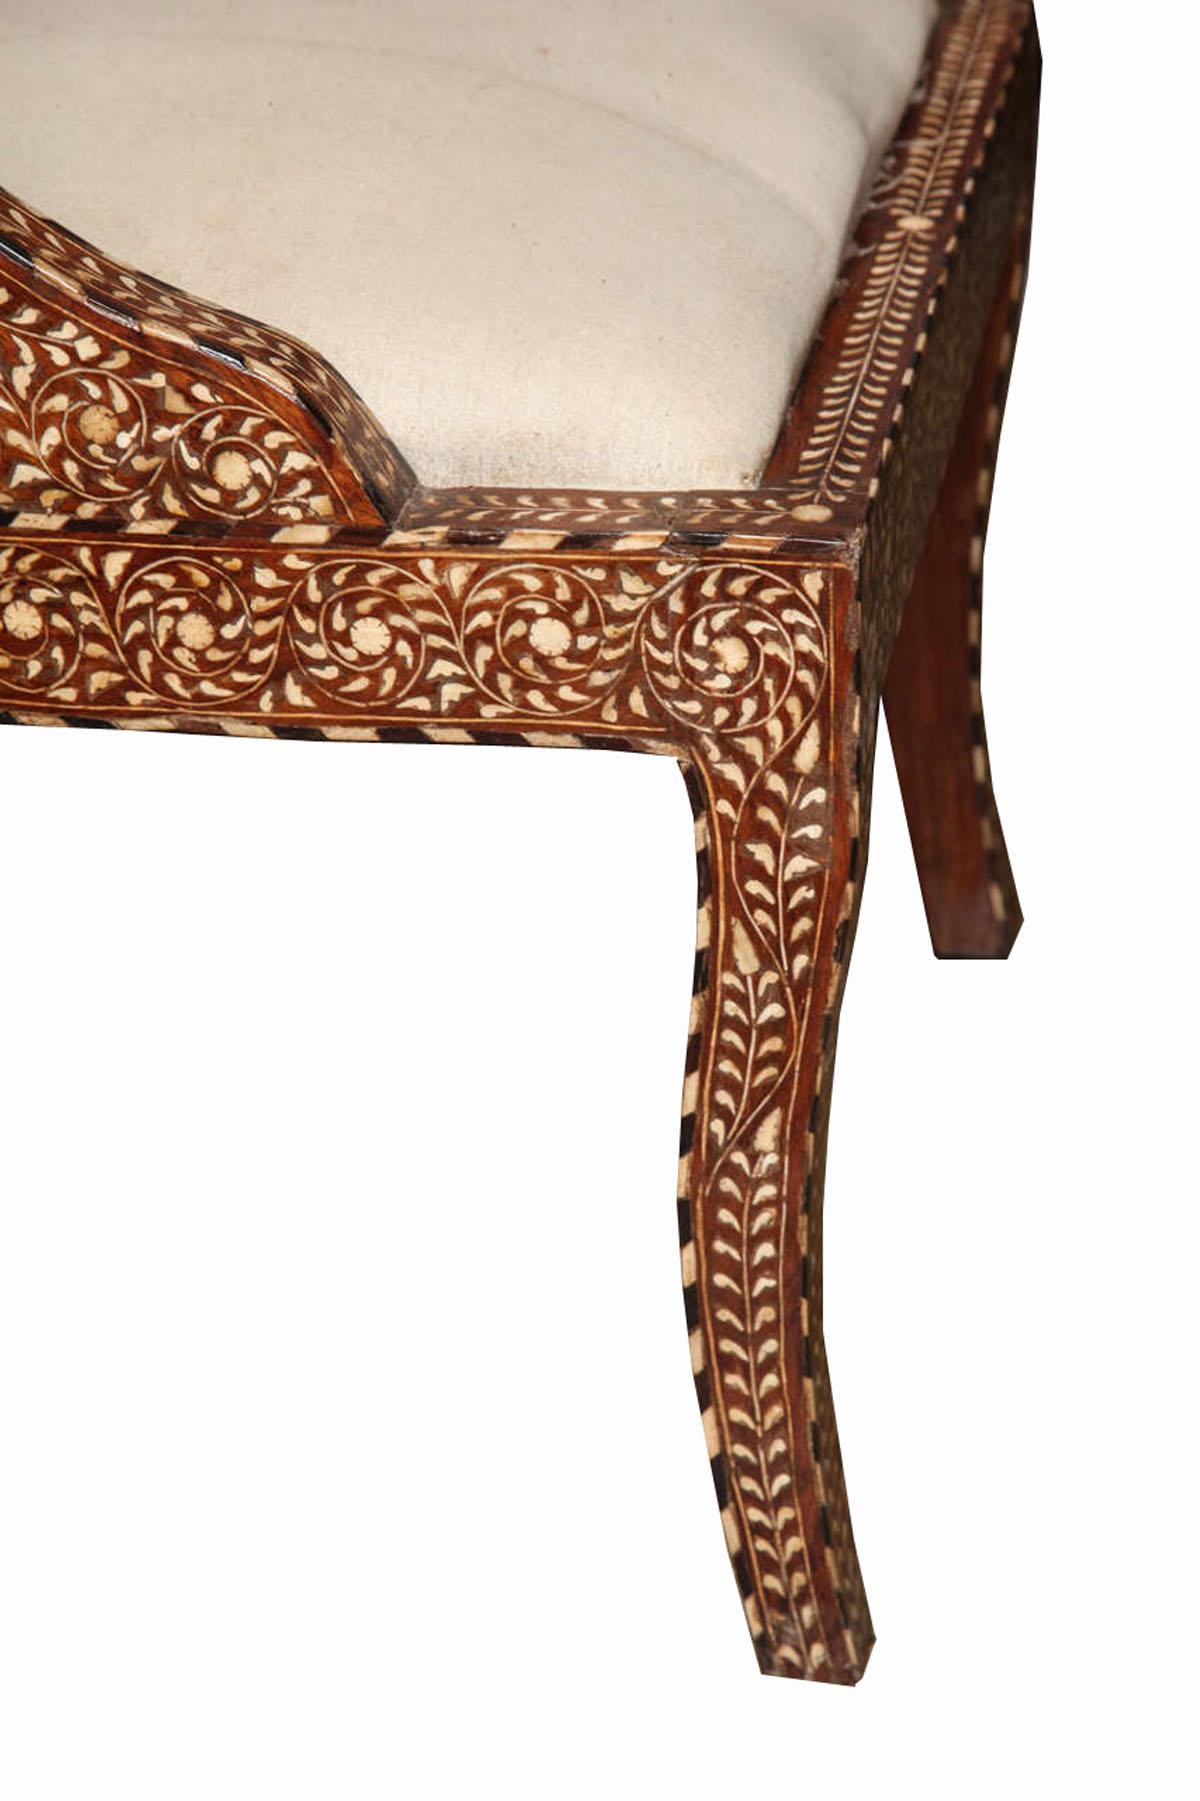 Indian Bone-Inlaid Teak Chair from India, Late 20th Century